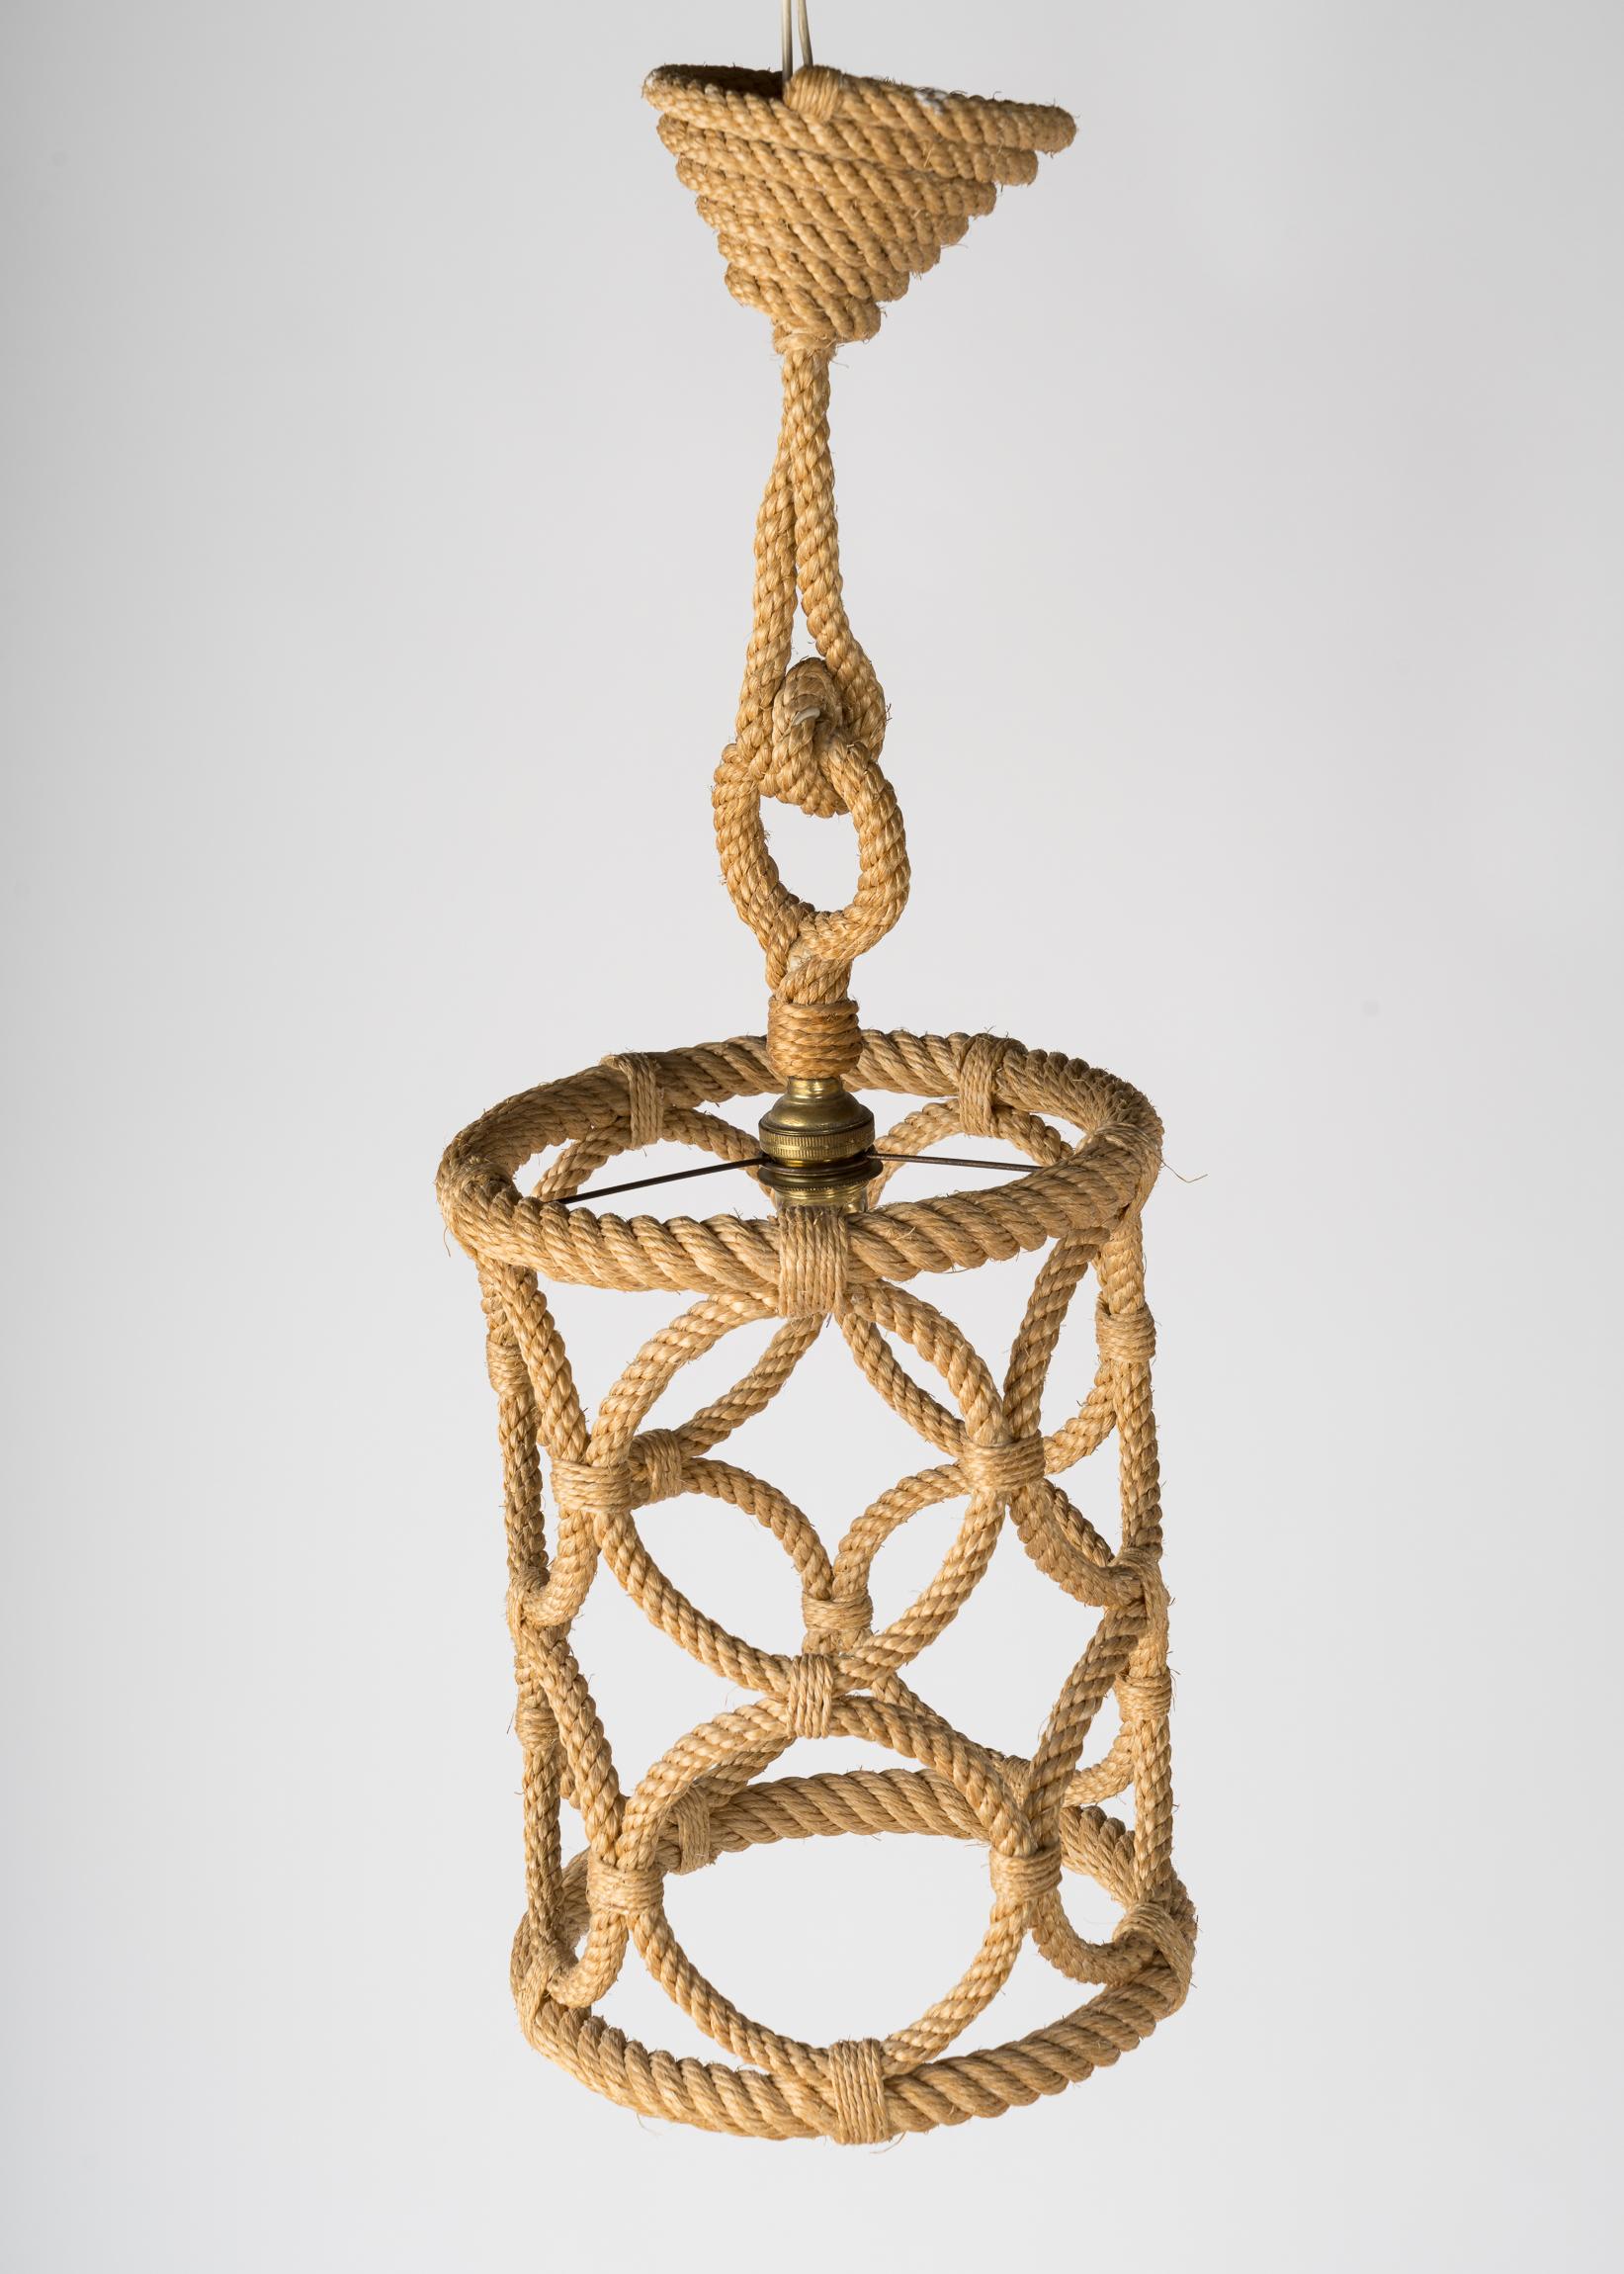 Mid-20th Century Iconic Rope Chandelier by Adrien Audoux & Frida Minnet, France 1960s For Sale